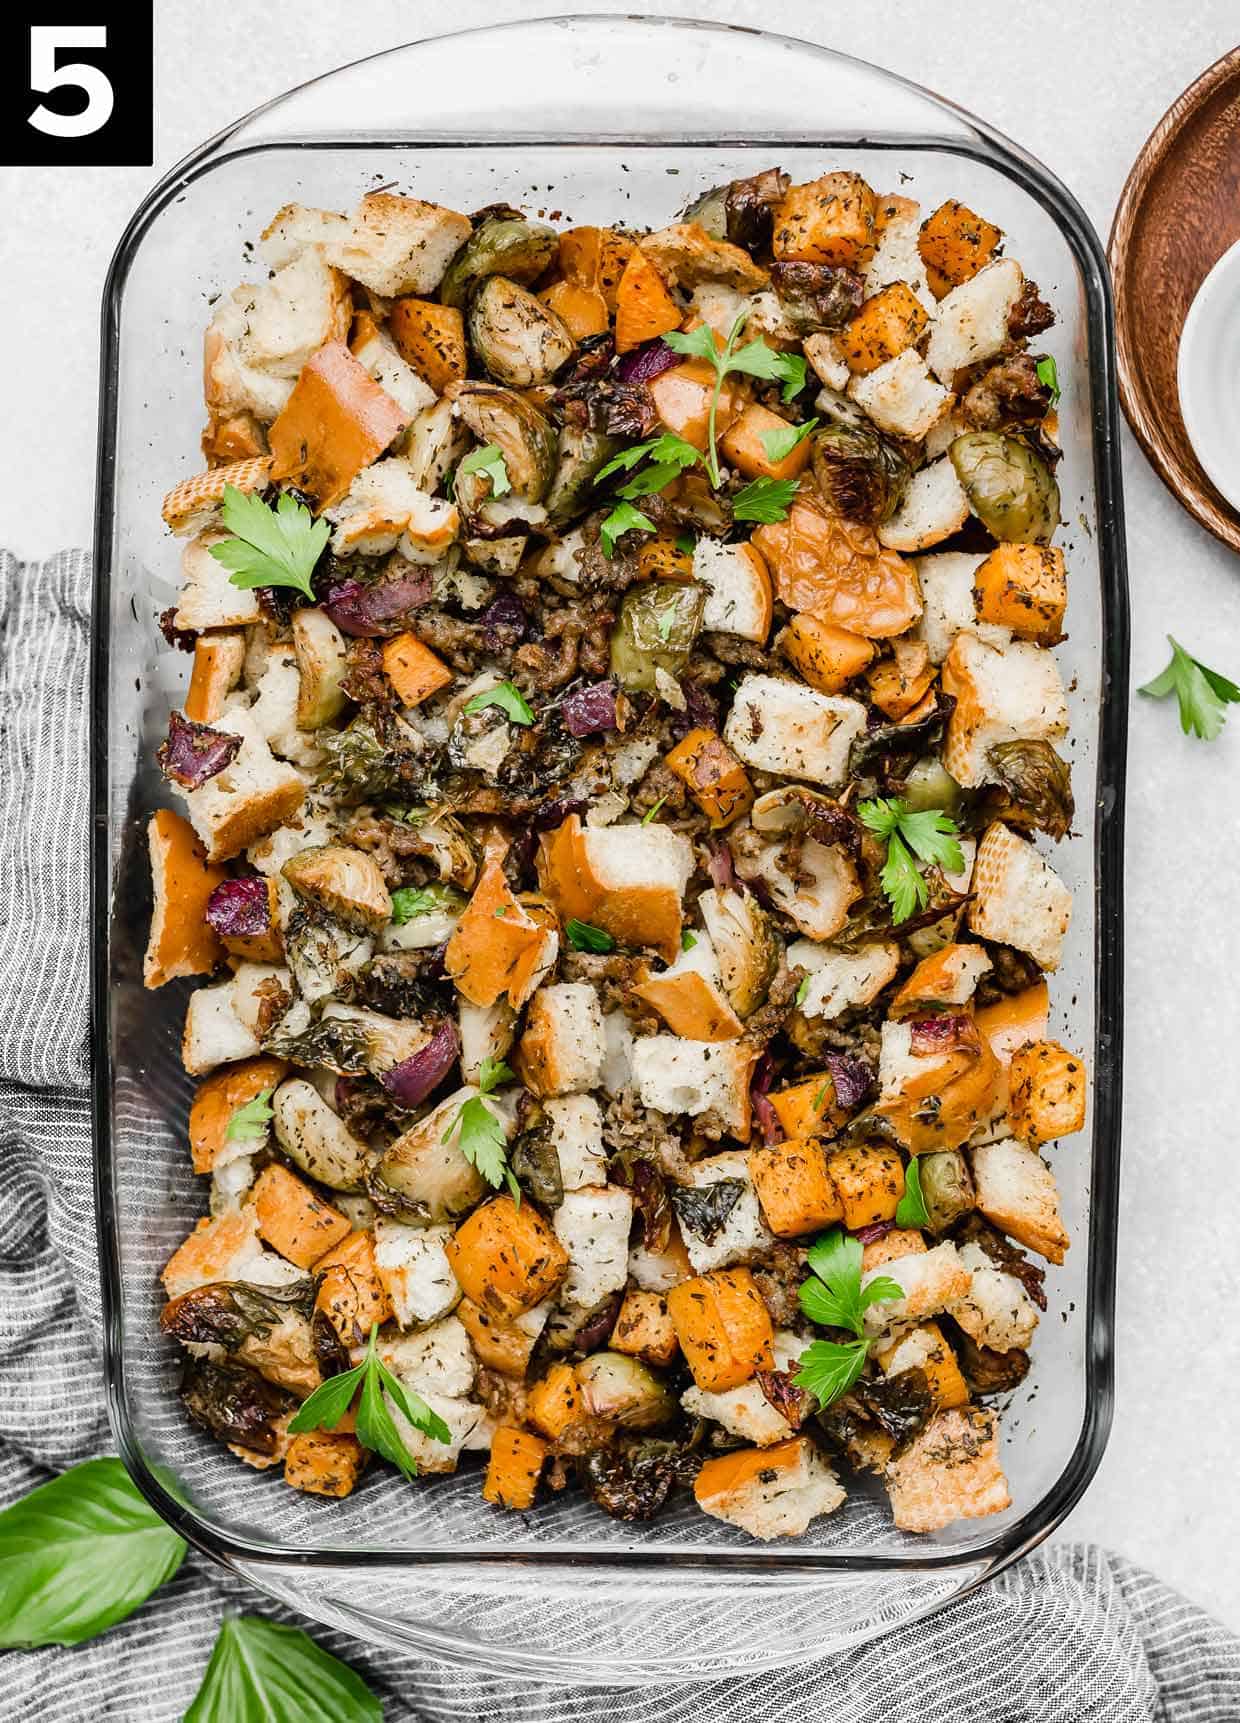 Overhead photo of Autumn Roasted Vegetable Stuffing recipe in a glass casserole dish on a white background.